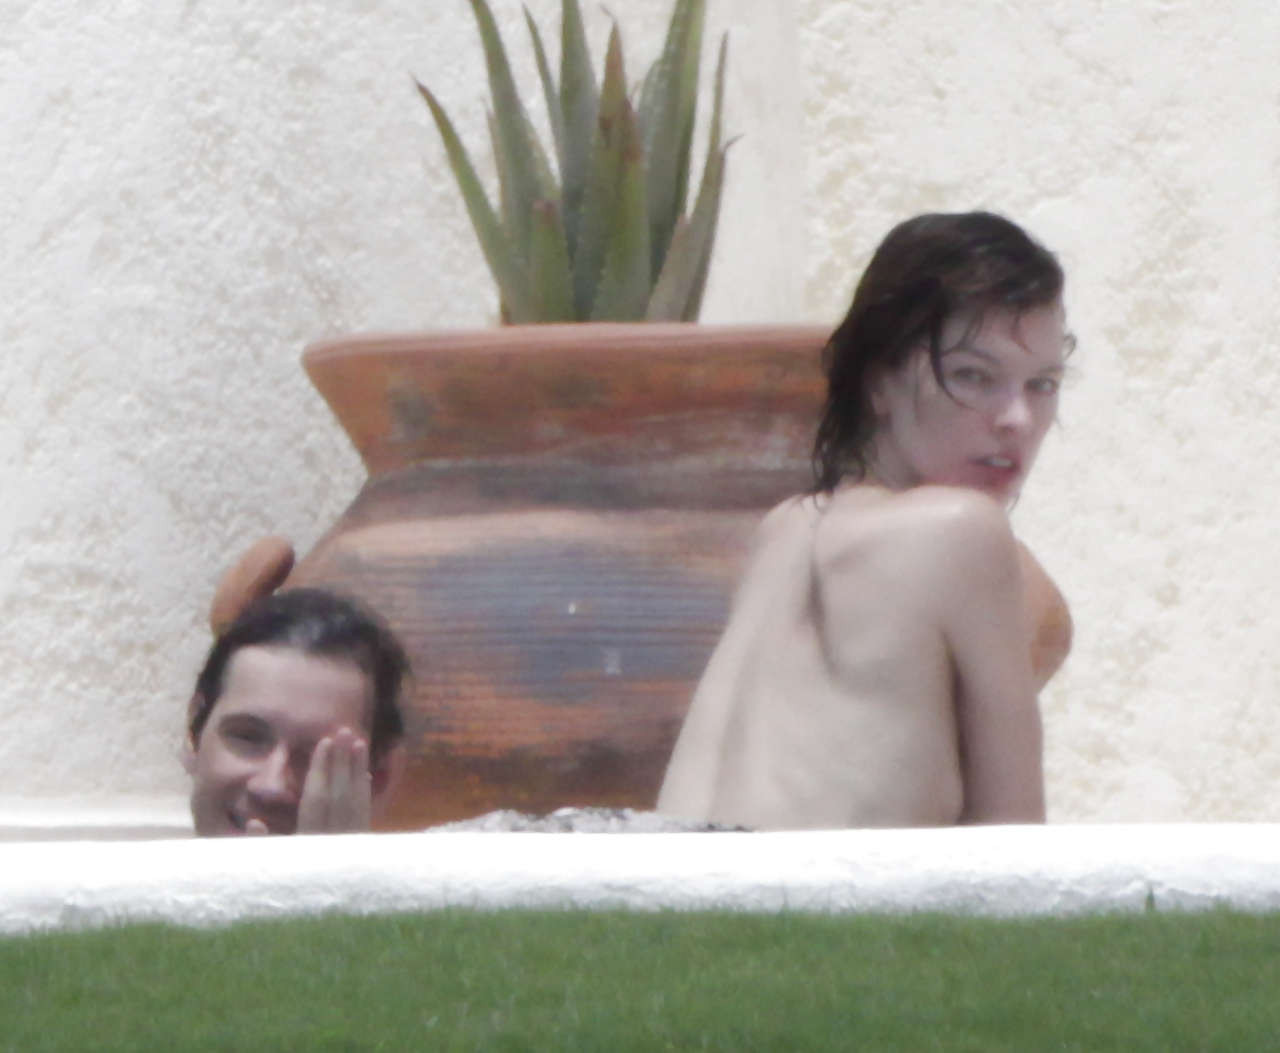 Milla Jovovich caught topless in pool by paparazzi and giving them middle finger #75289761